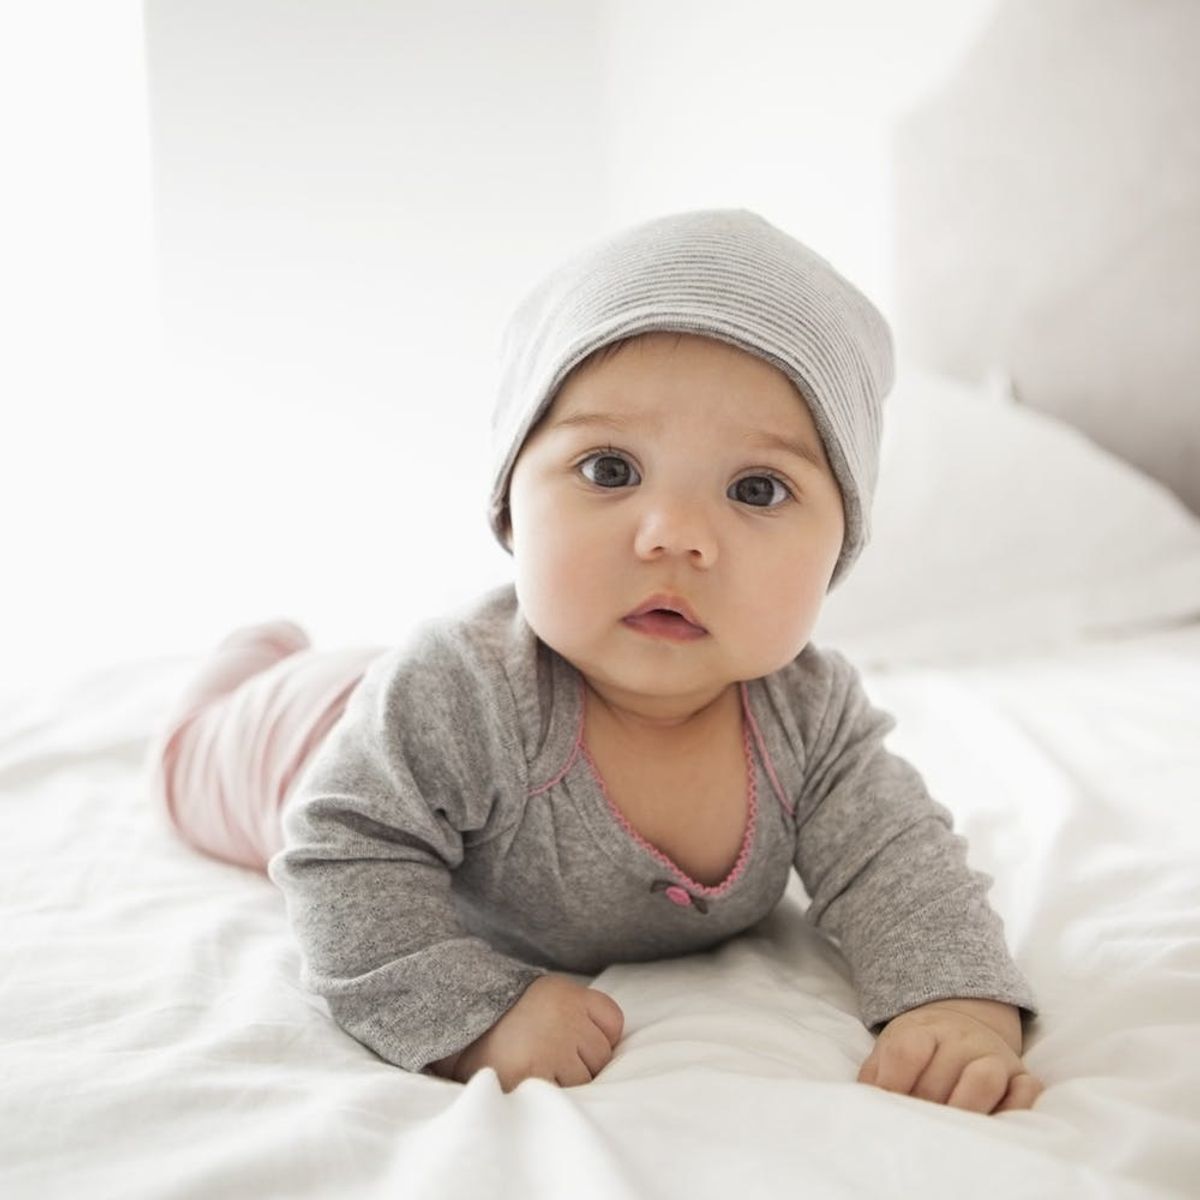 12 Classic Baby Names That Are Always Fashionable